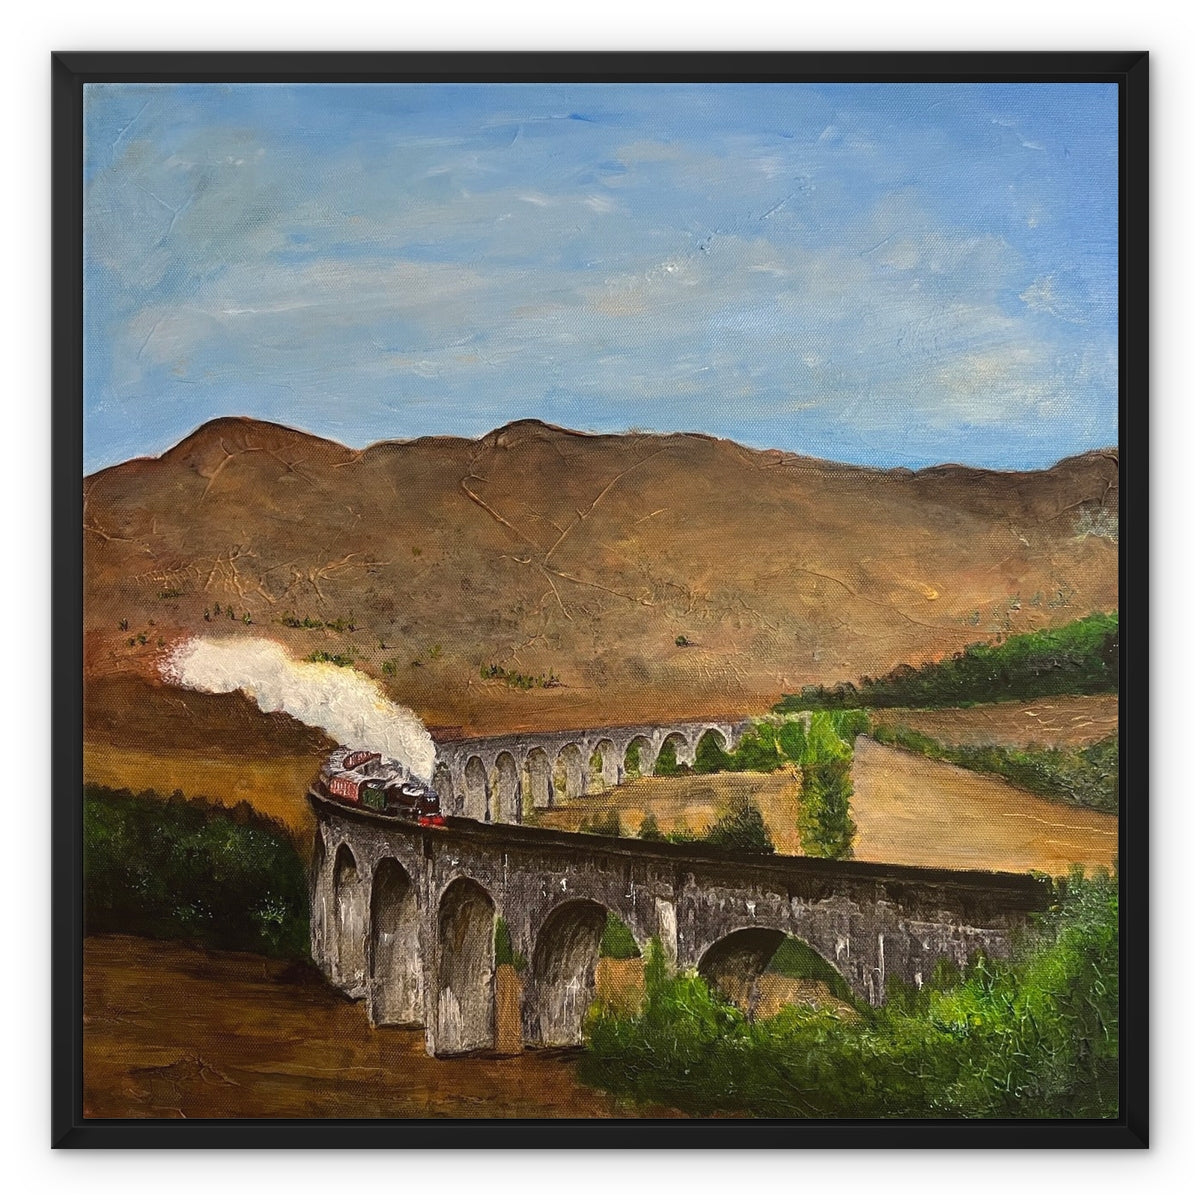 Glenfinnan Viaduct Painting | Framed Canvas From Scotland-Floating Framed Canvas Prints-Scottish Highlands & Lowlands Art Gallery-24"x24"-Paintings, Prints, Homeware, Art Gifts From Scotland By Scottish Artist Kevin Hunter